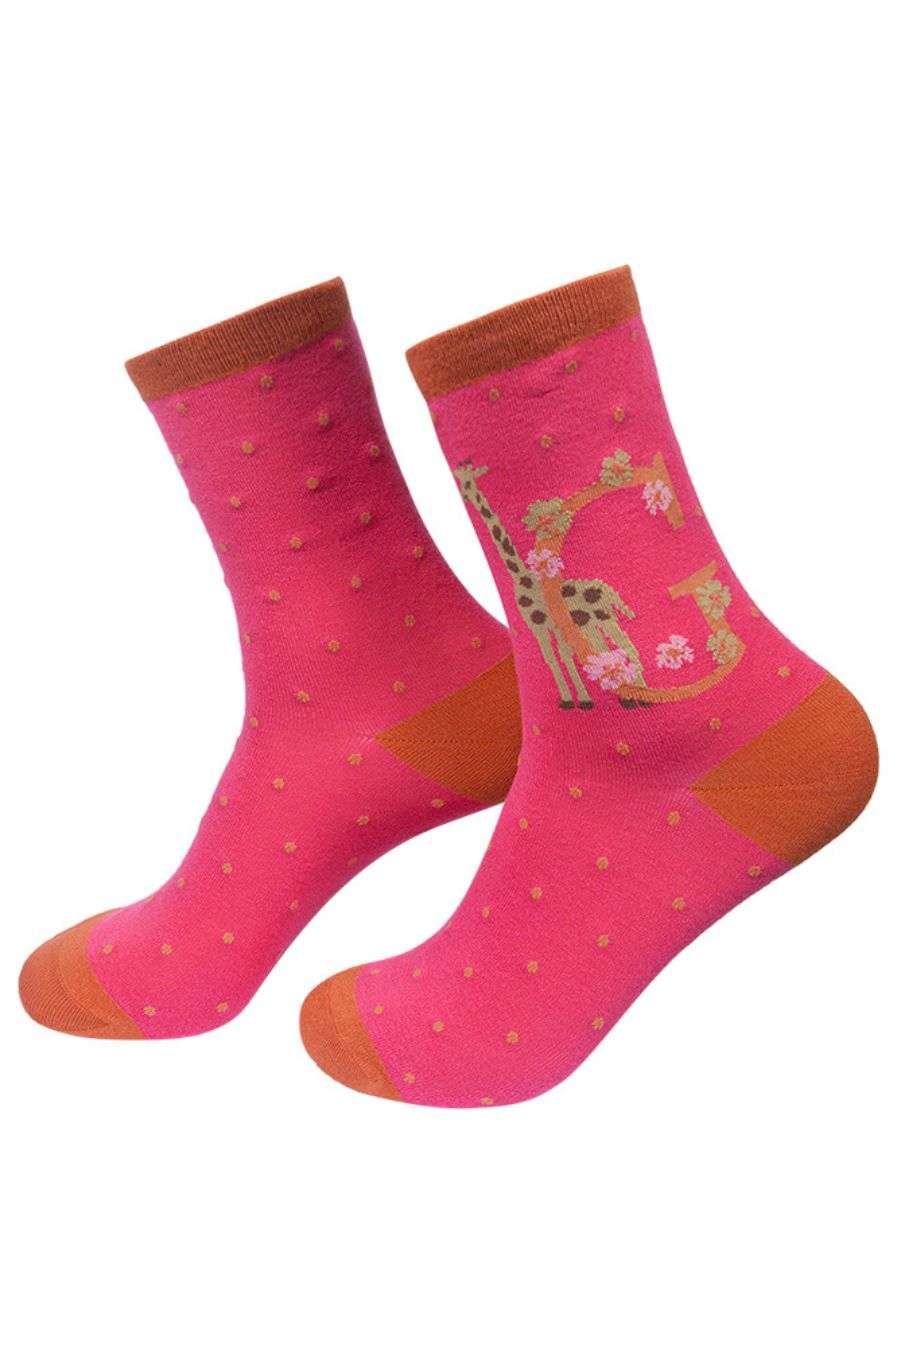 hot pink socks with a large letter g, a giraffe and a floral pattern on the ankle